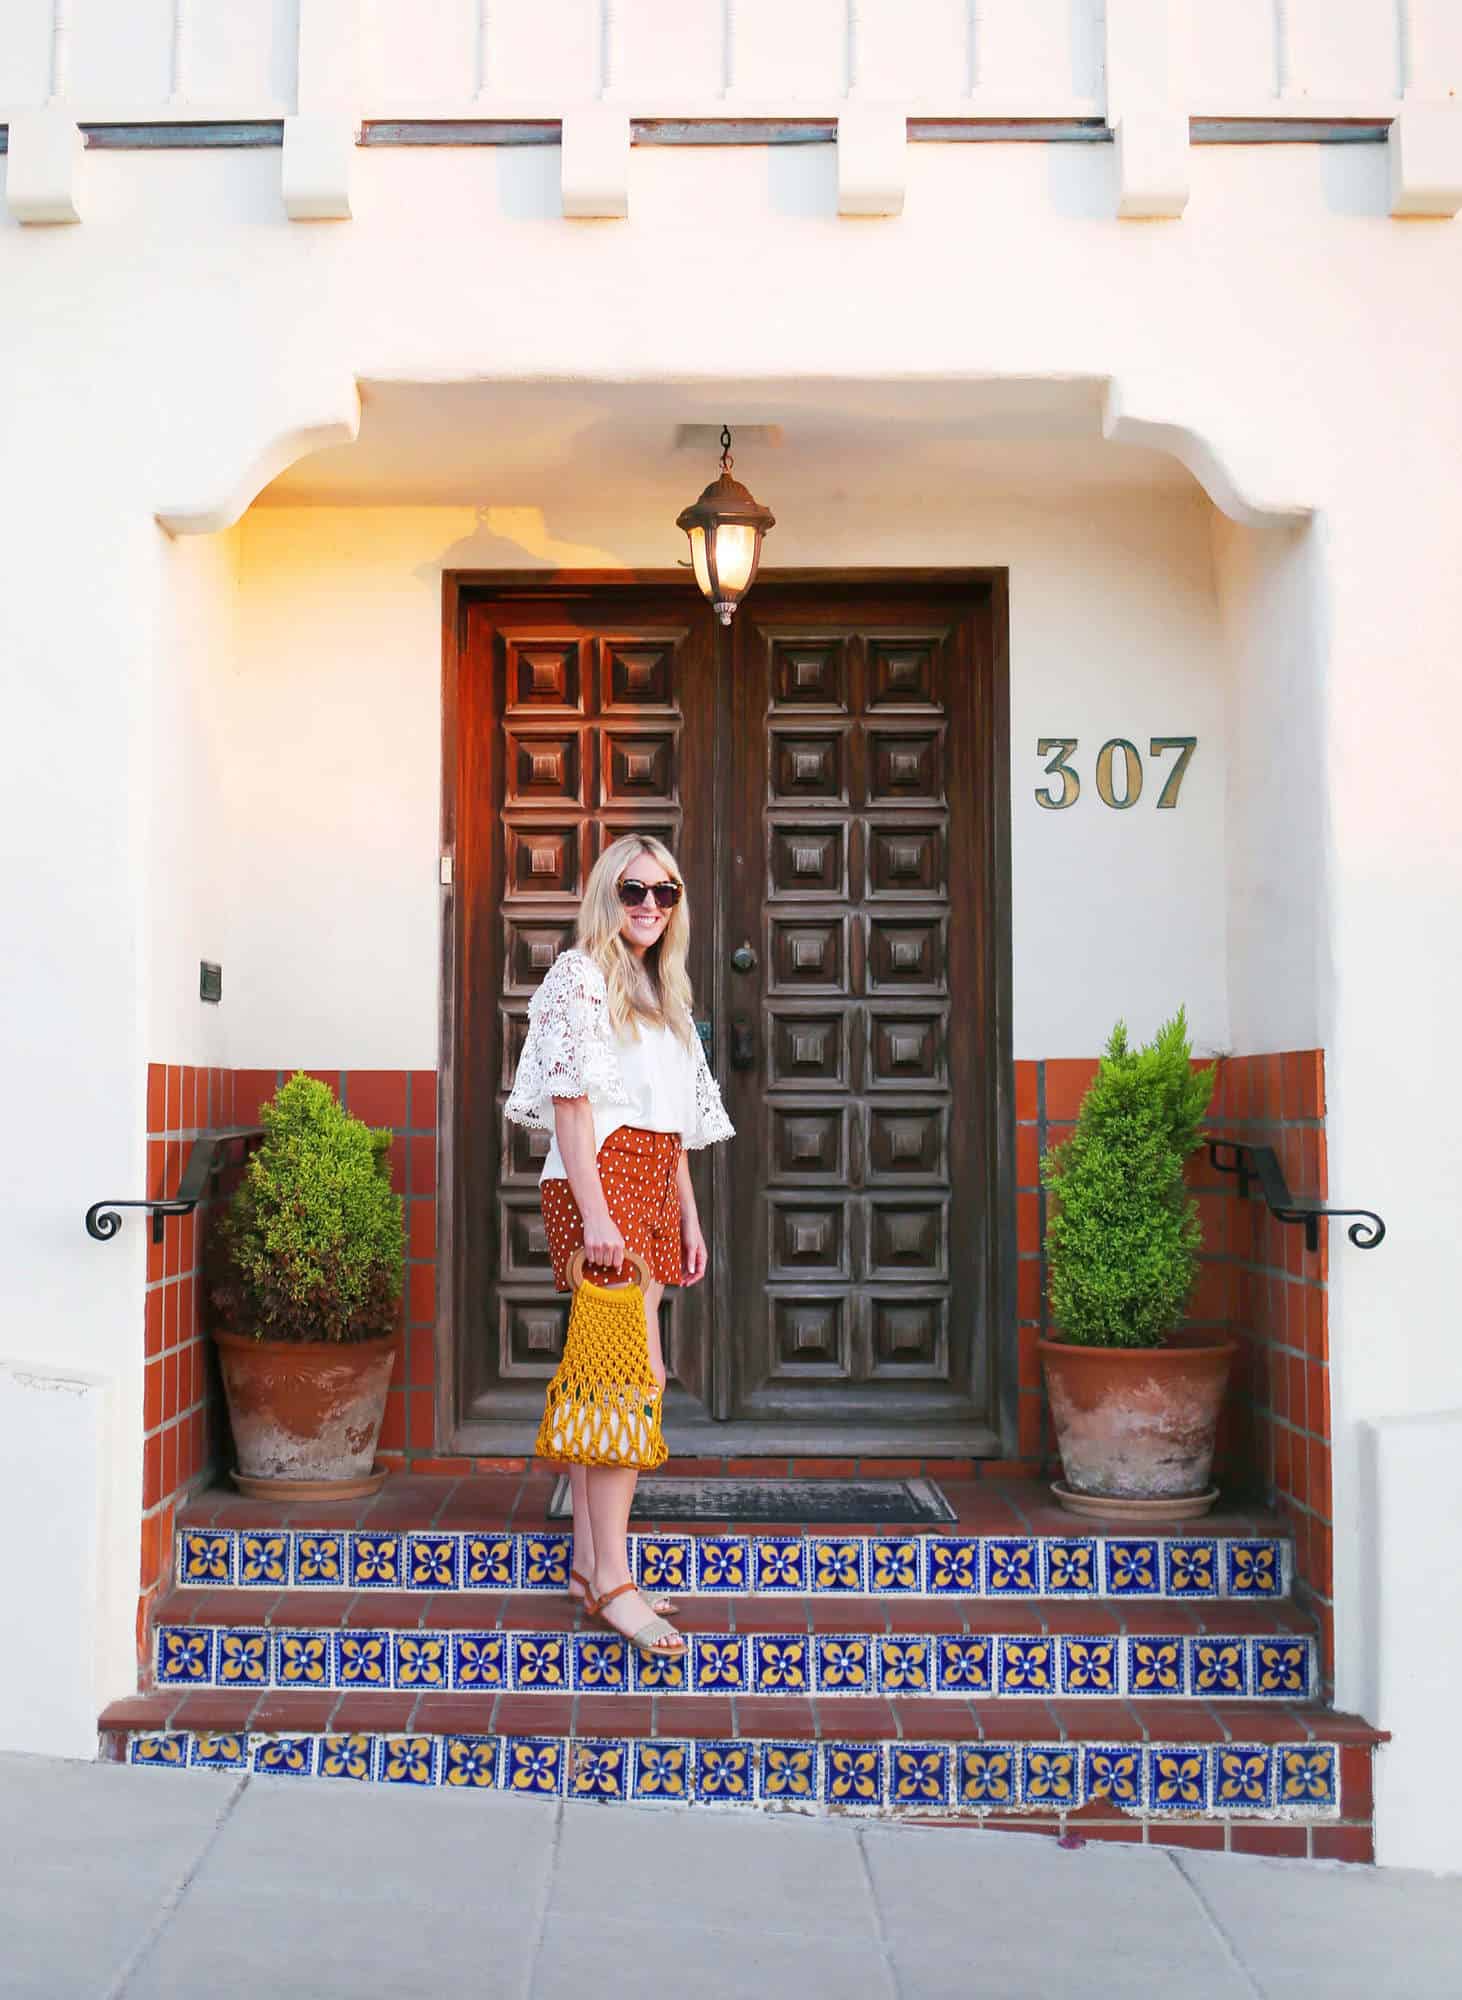 a blonde woman wearing sunglasses, a white long sleeve shirt, red shorts with white polka dots, and scandals standing on stairs in front of a house